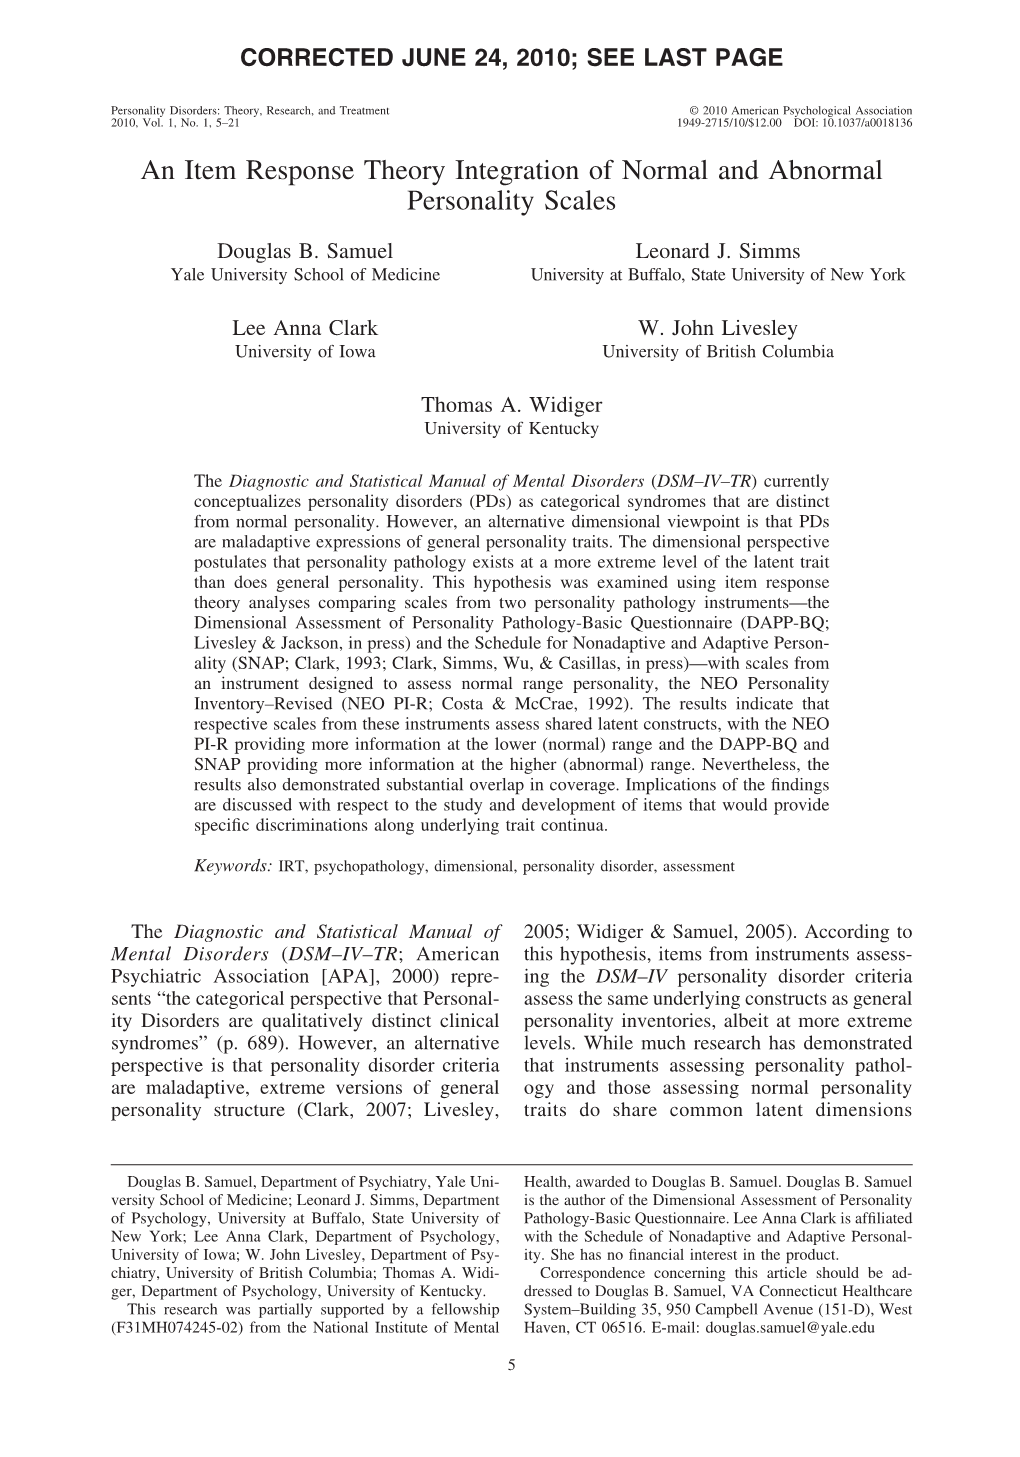 An Item Response Theory Integration of Normal and Abnormal Personality Scales